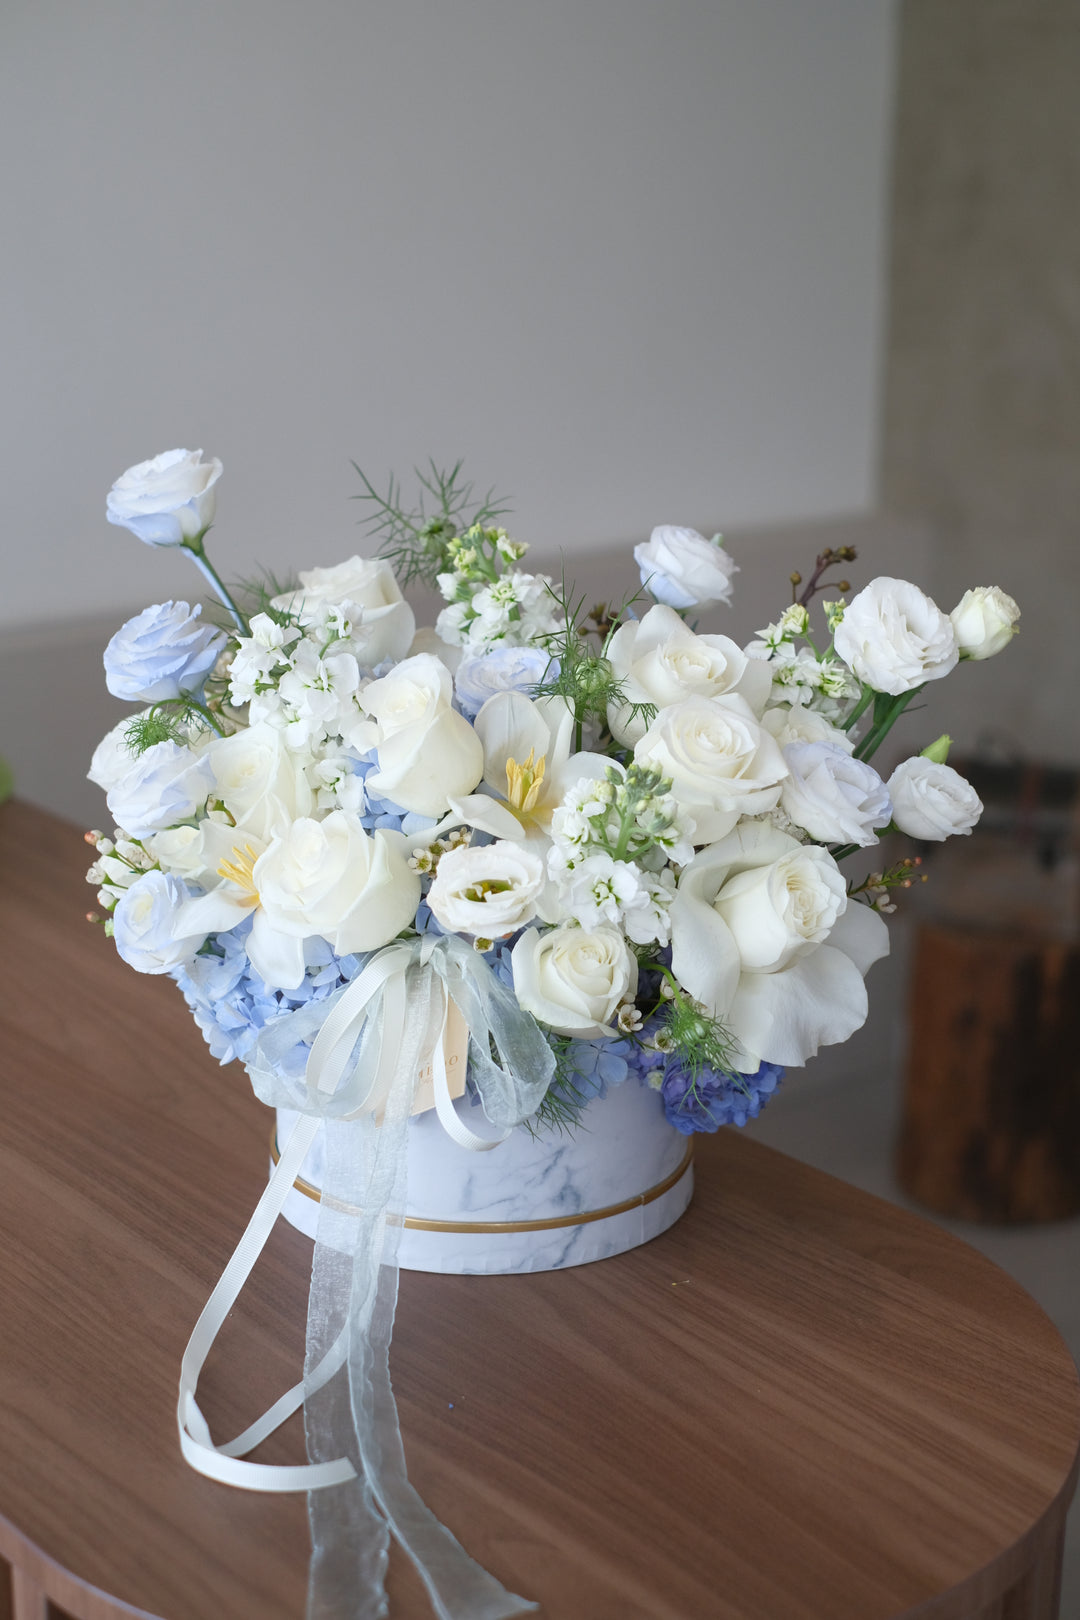 white roses flower arrangements ideas, floral shop with baby breath, white persian buttercup via florist in butterworth 